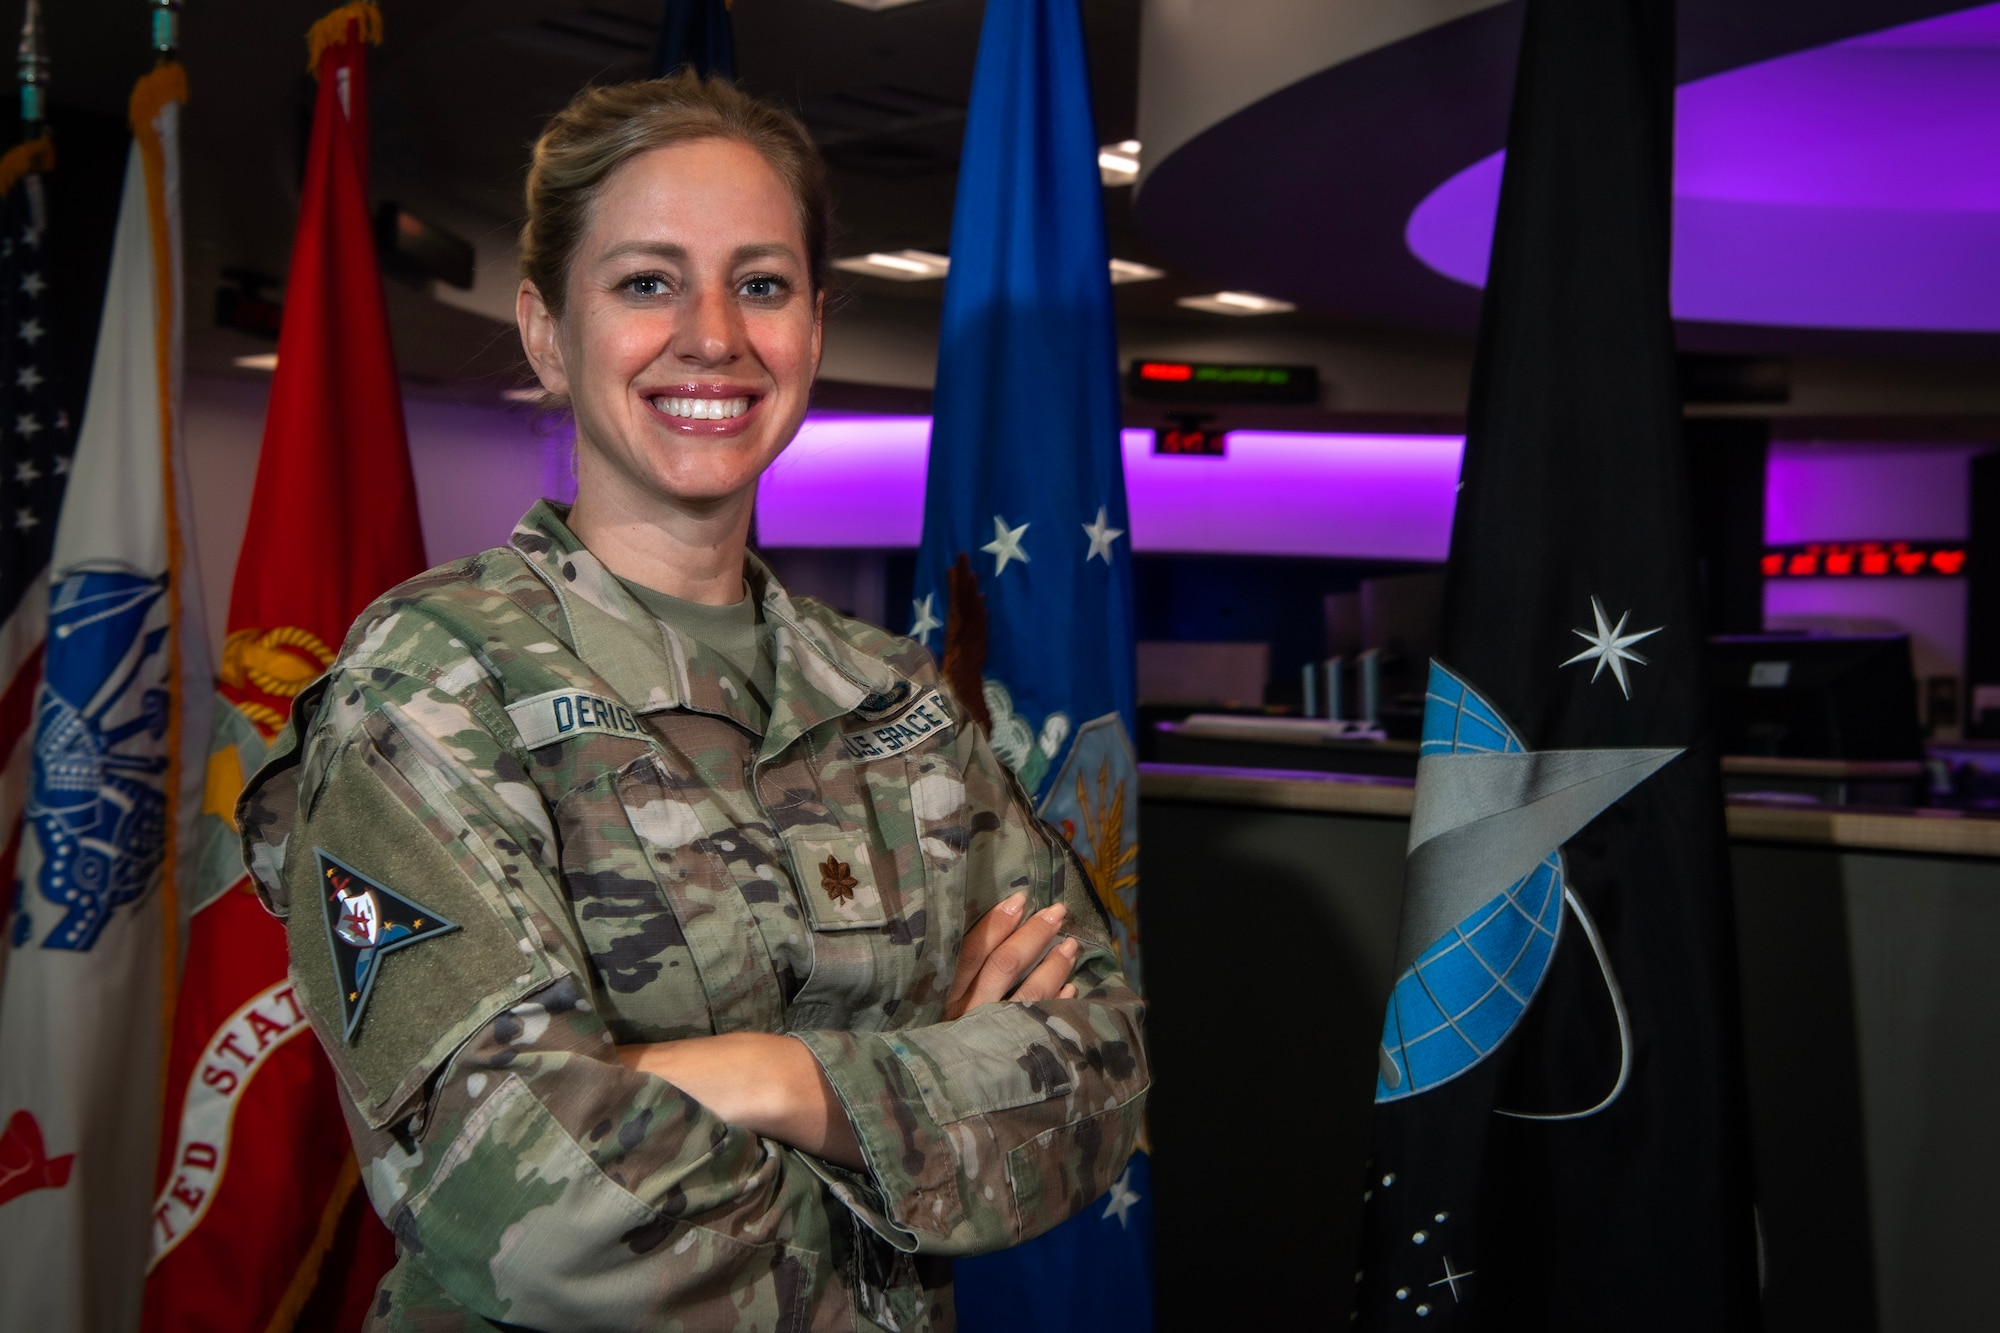 Woman in uniform standing in front of USSF flag